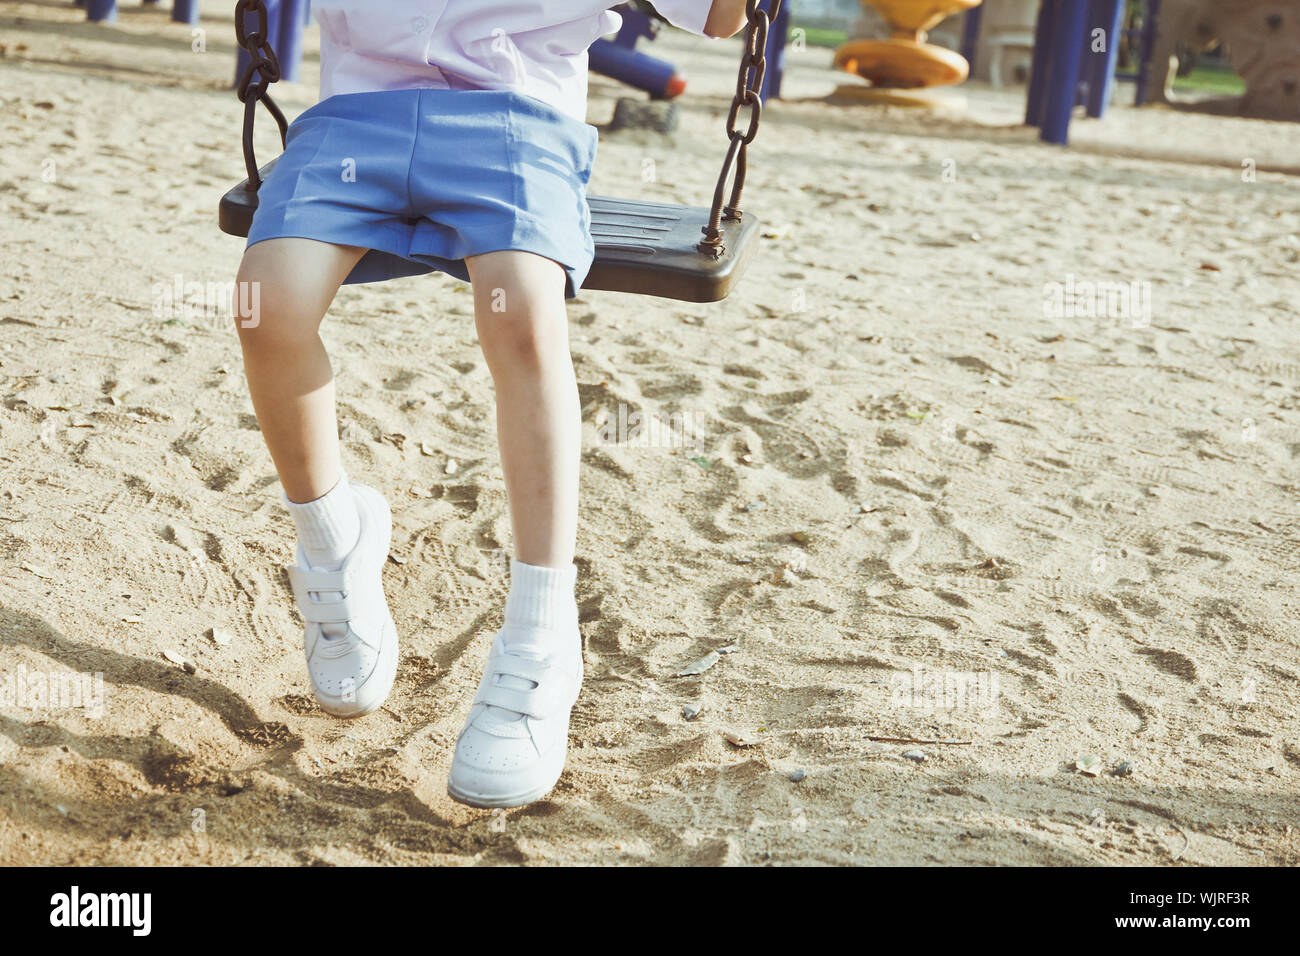 Little child on a swing in the park. Stock Photo